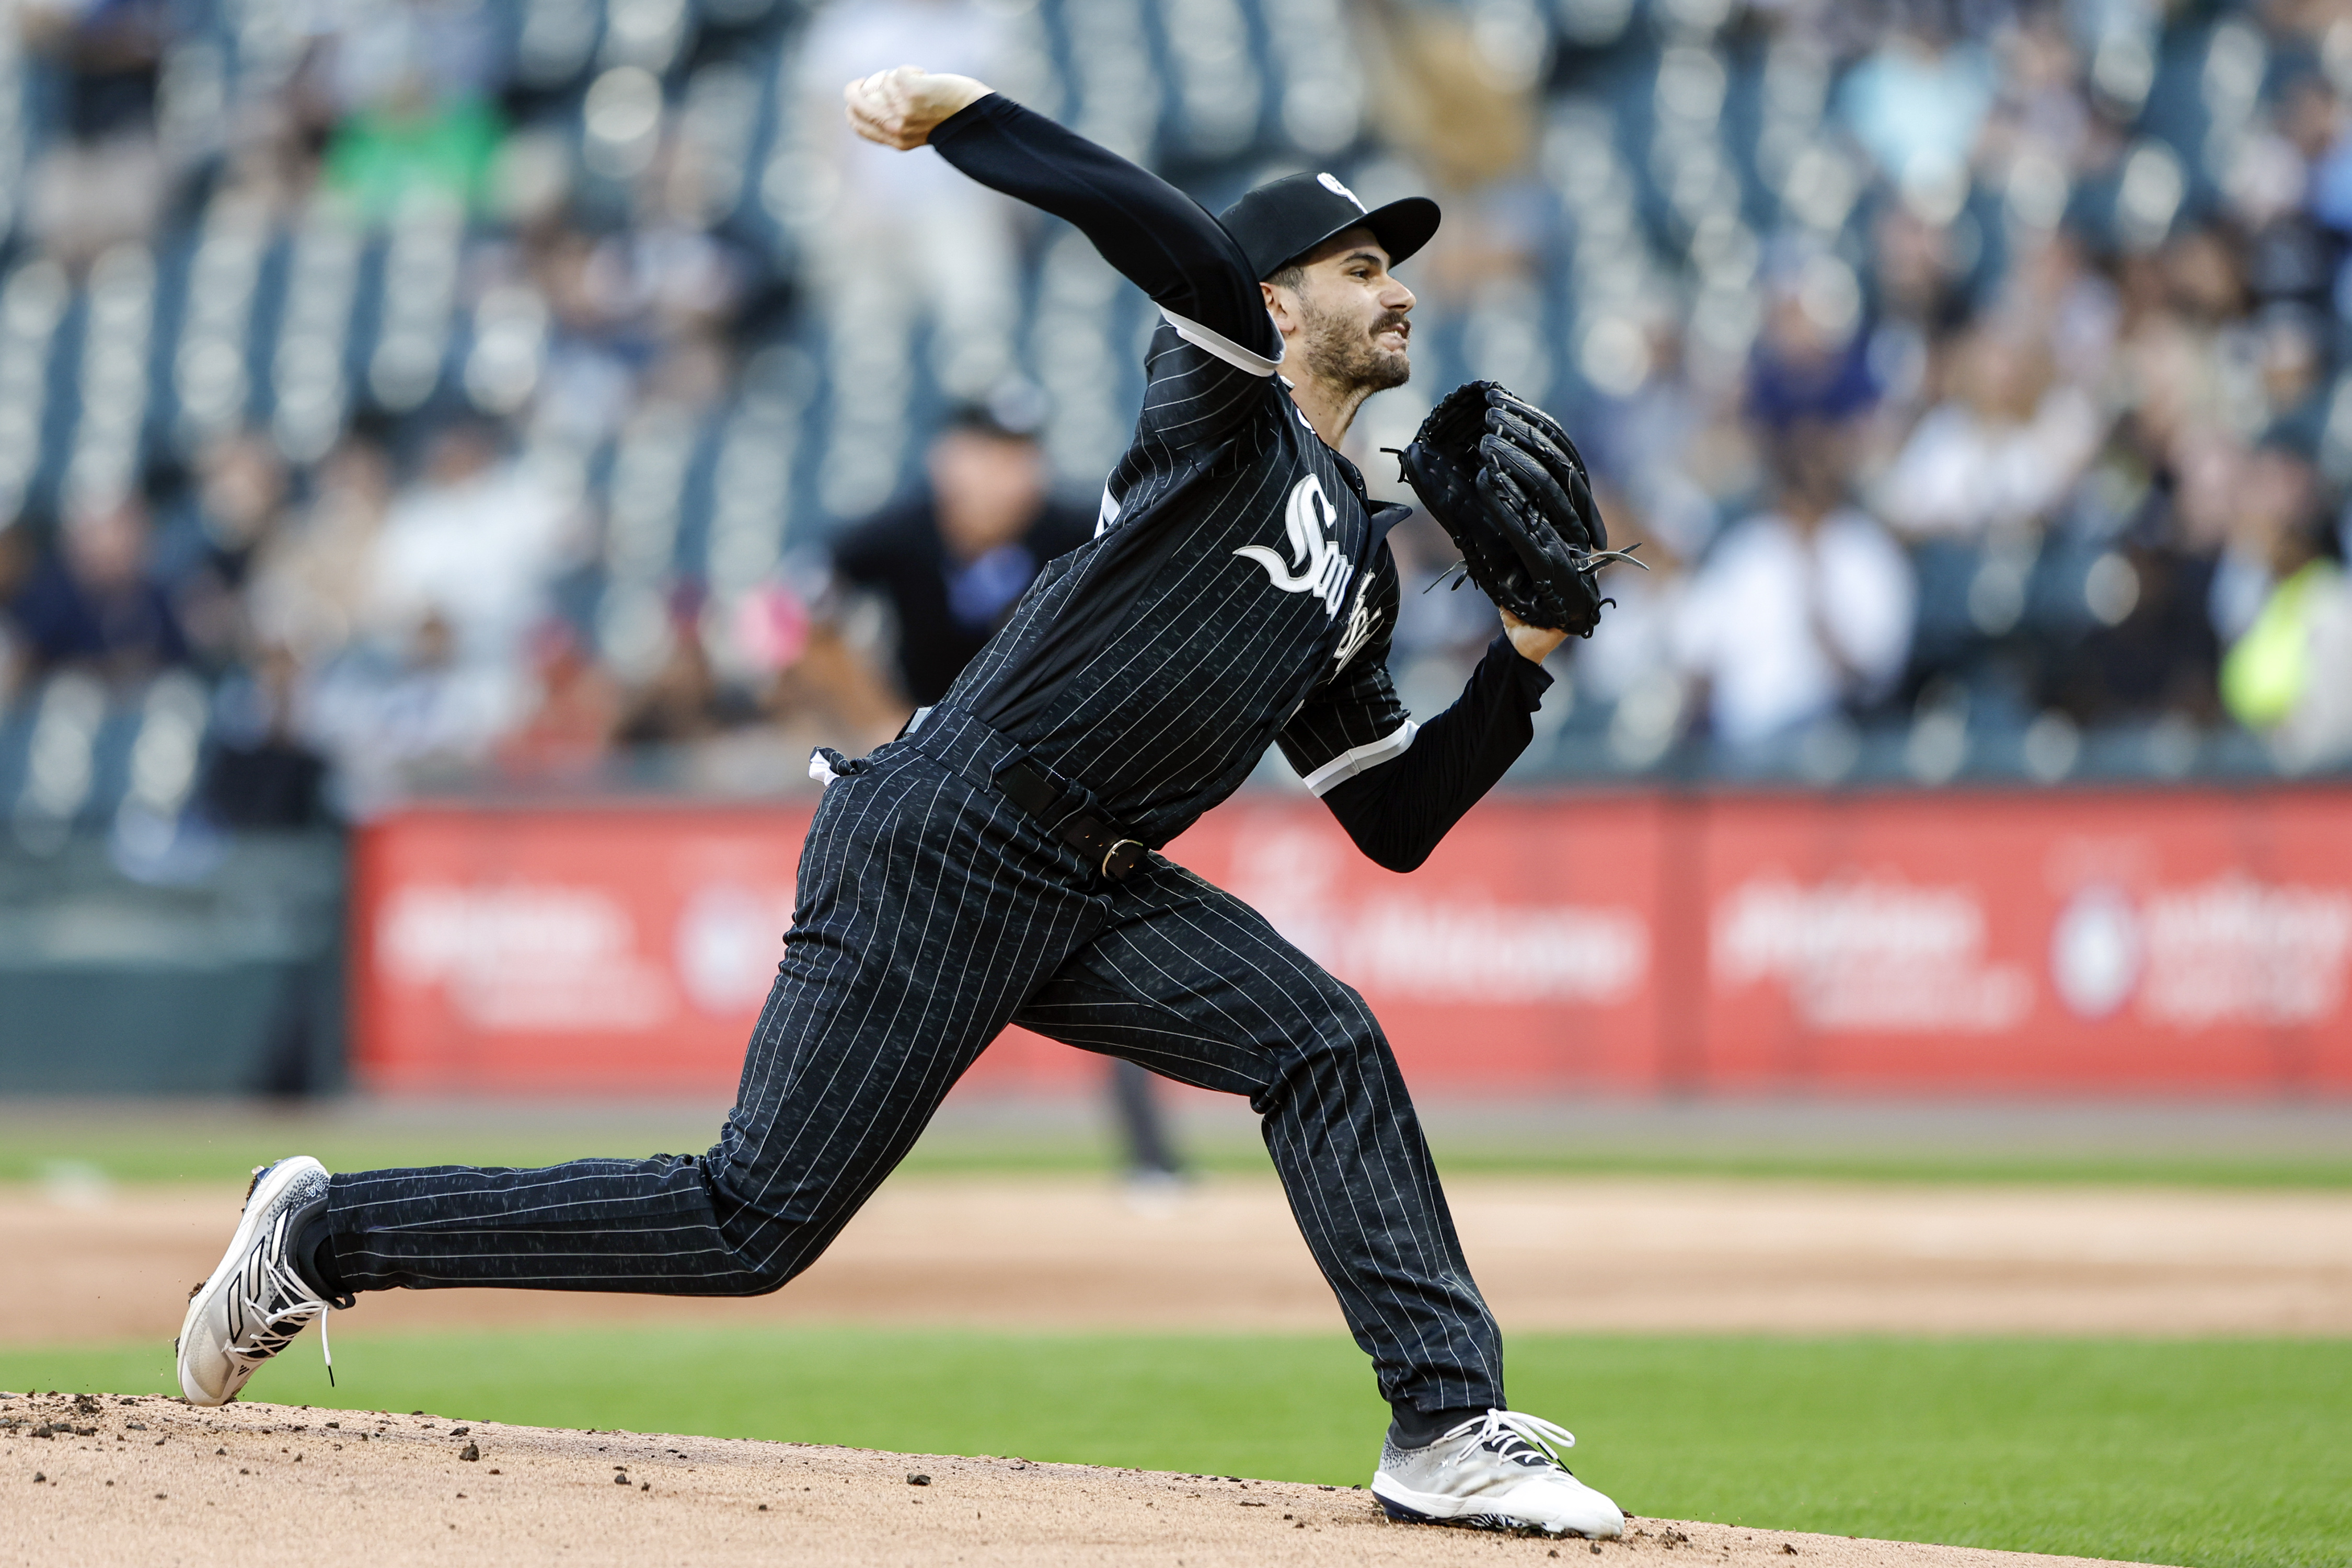 mlb: oakland athletics at chicago white sox, dylan cease, yankees